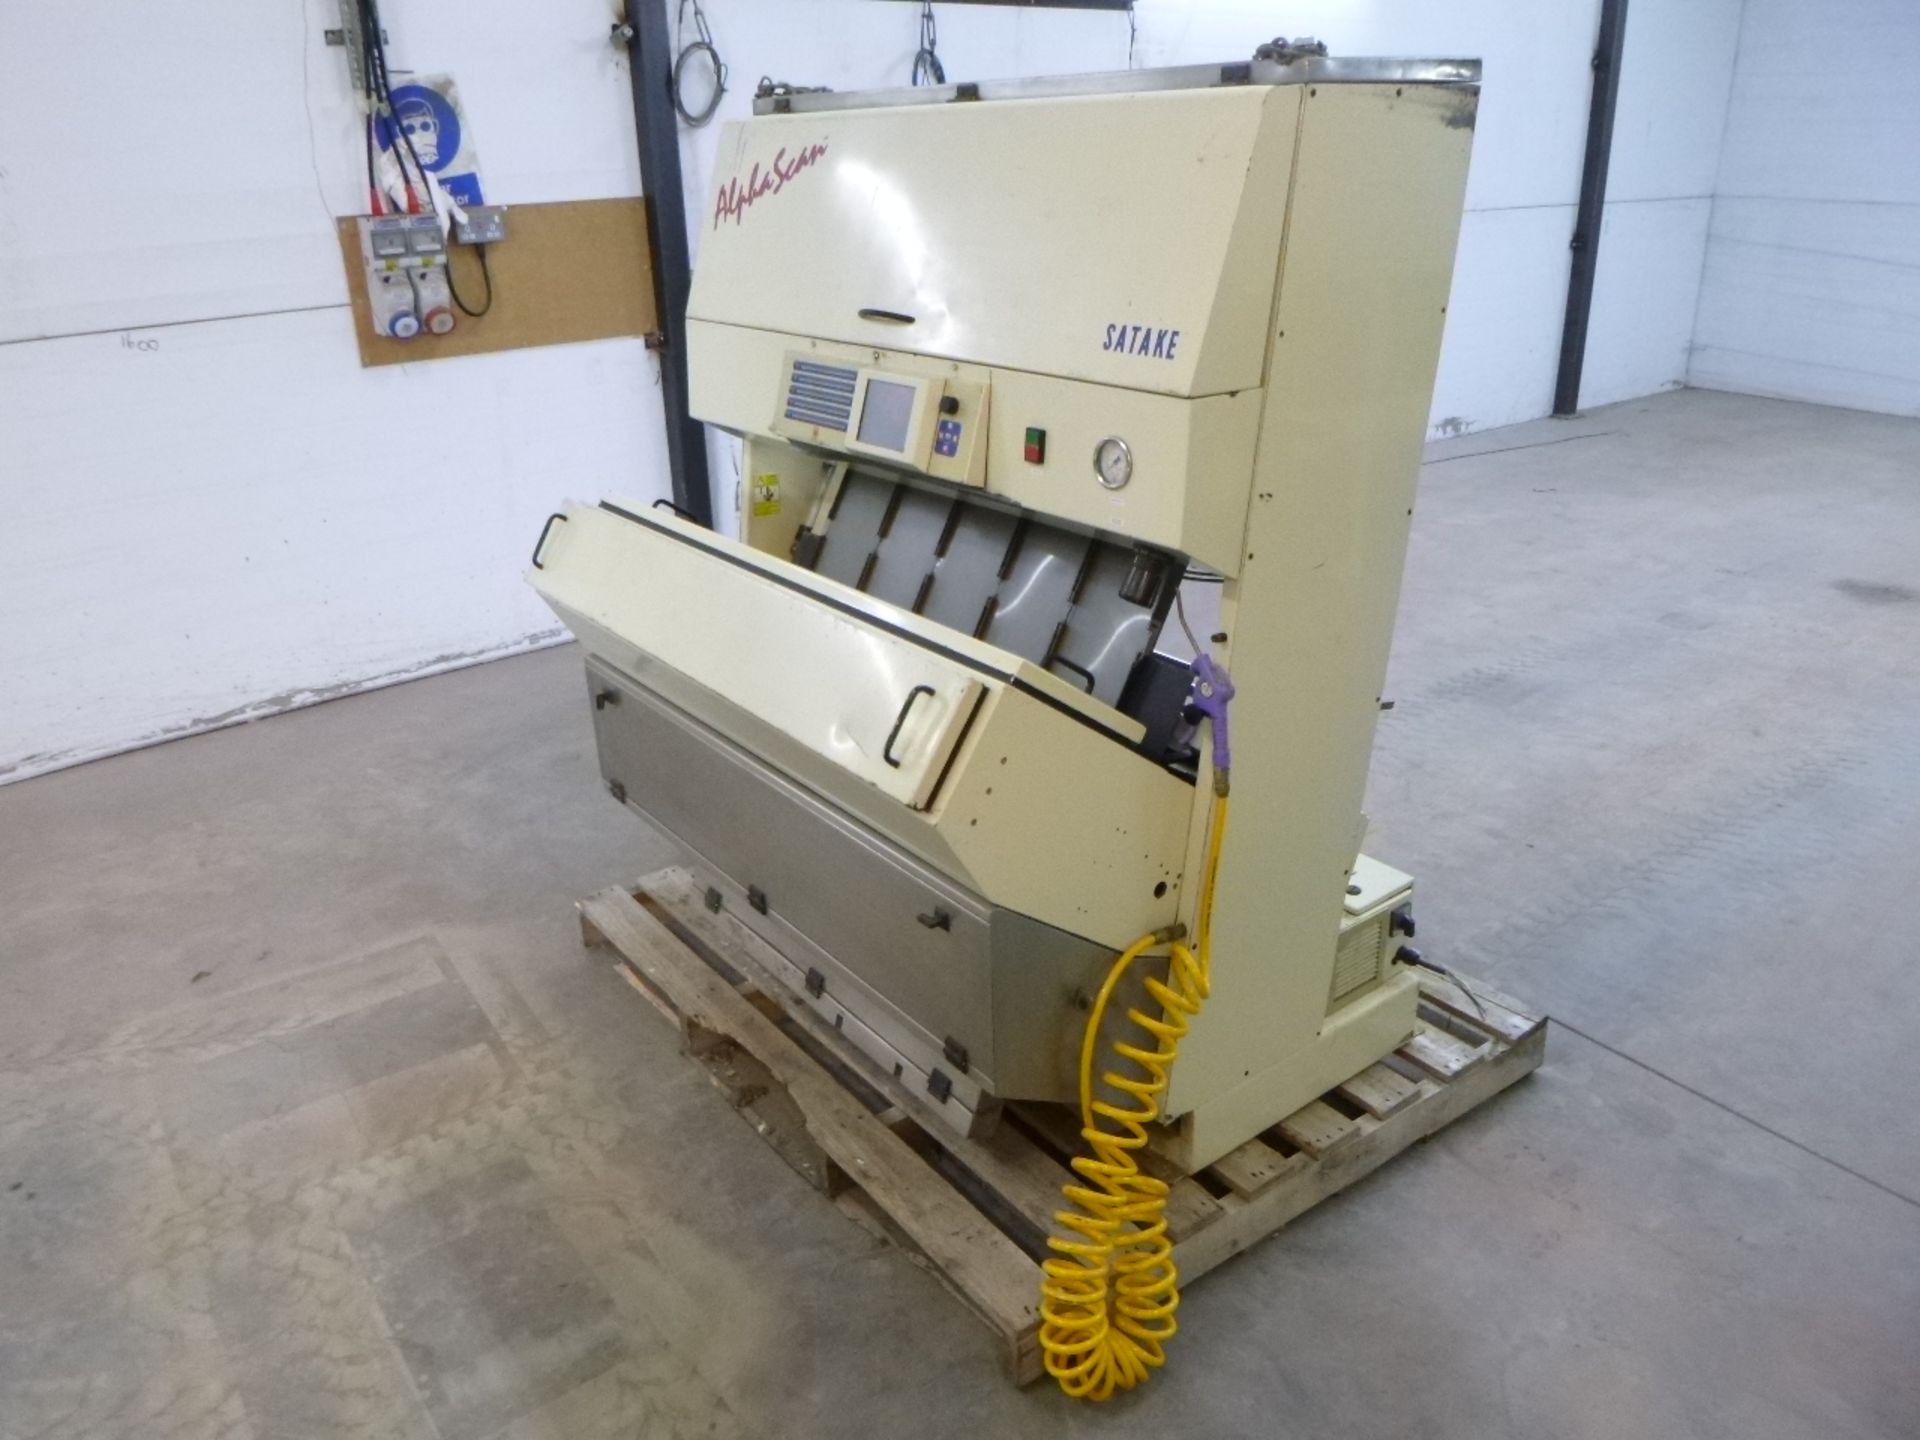 Satake AS 160967 Alpha Scan Colour Sorter, year of manufacture 2007, 1700 watts, 220V (vendors - Image 6 of 11